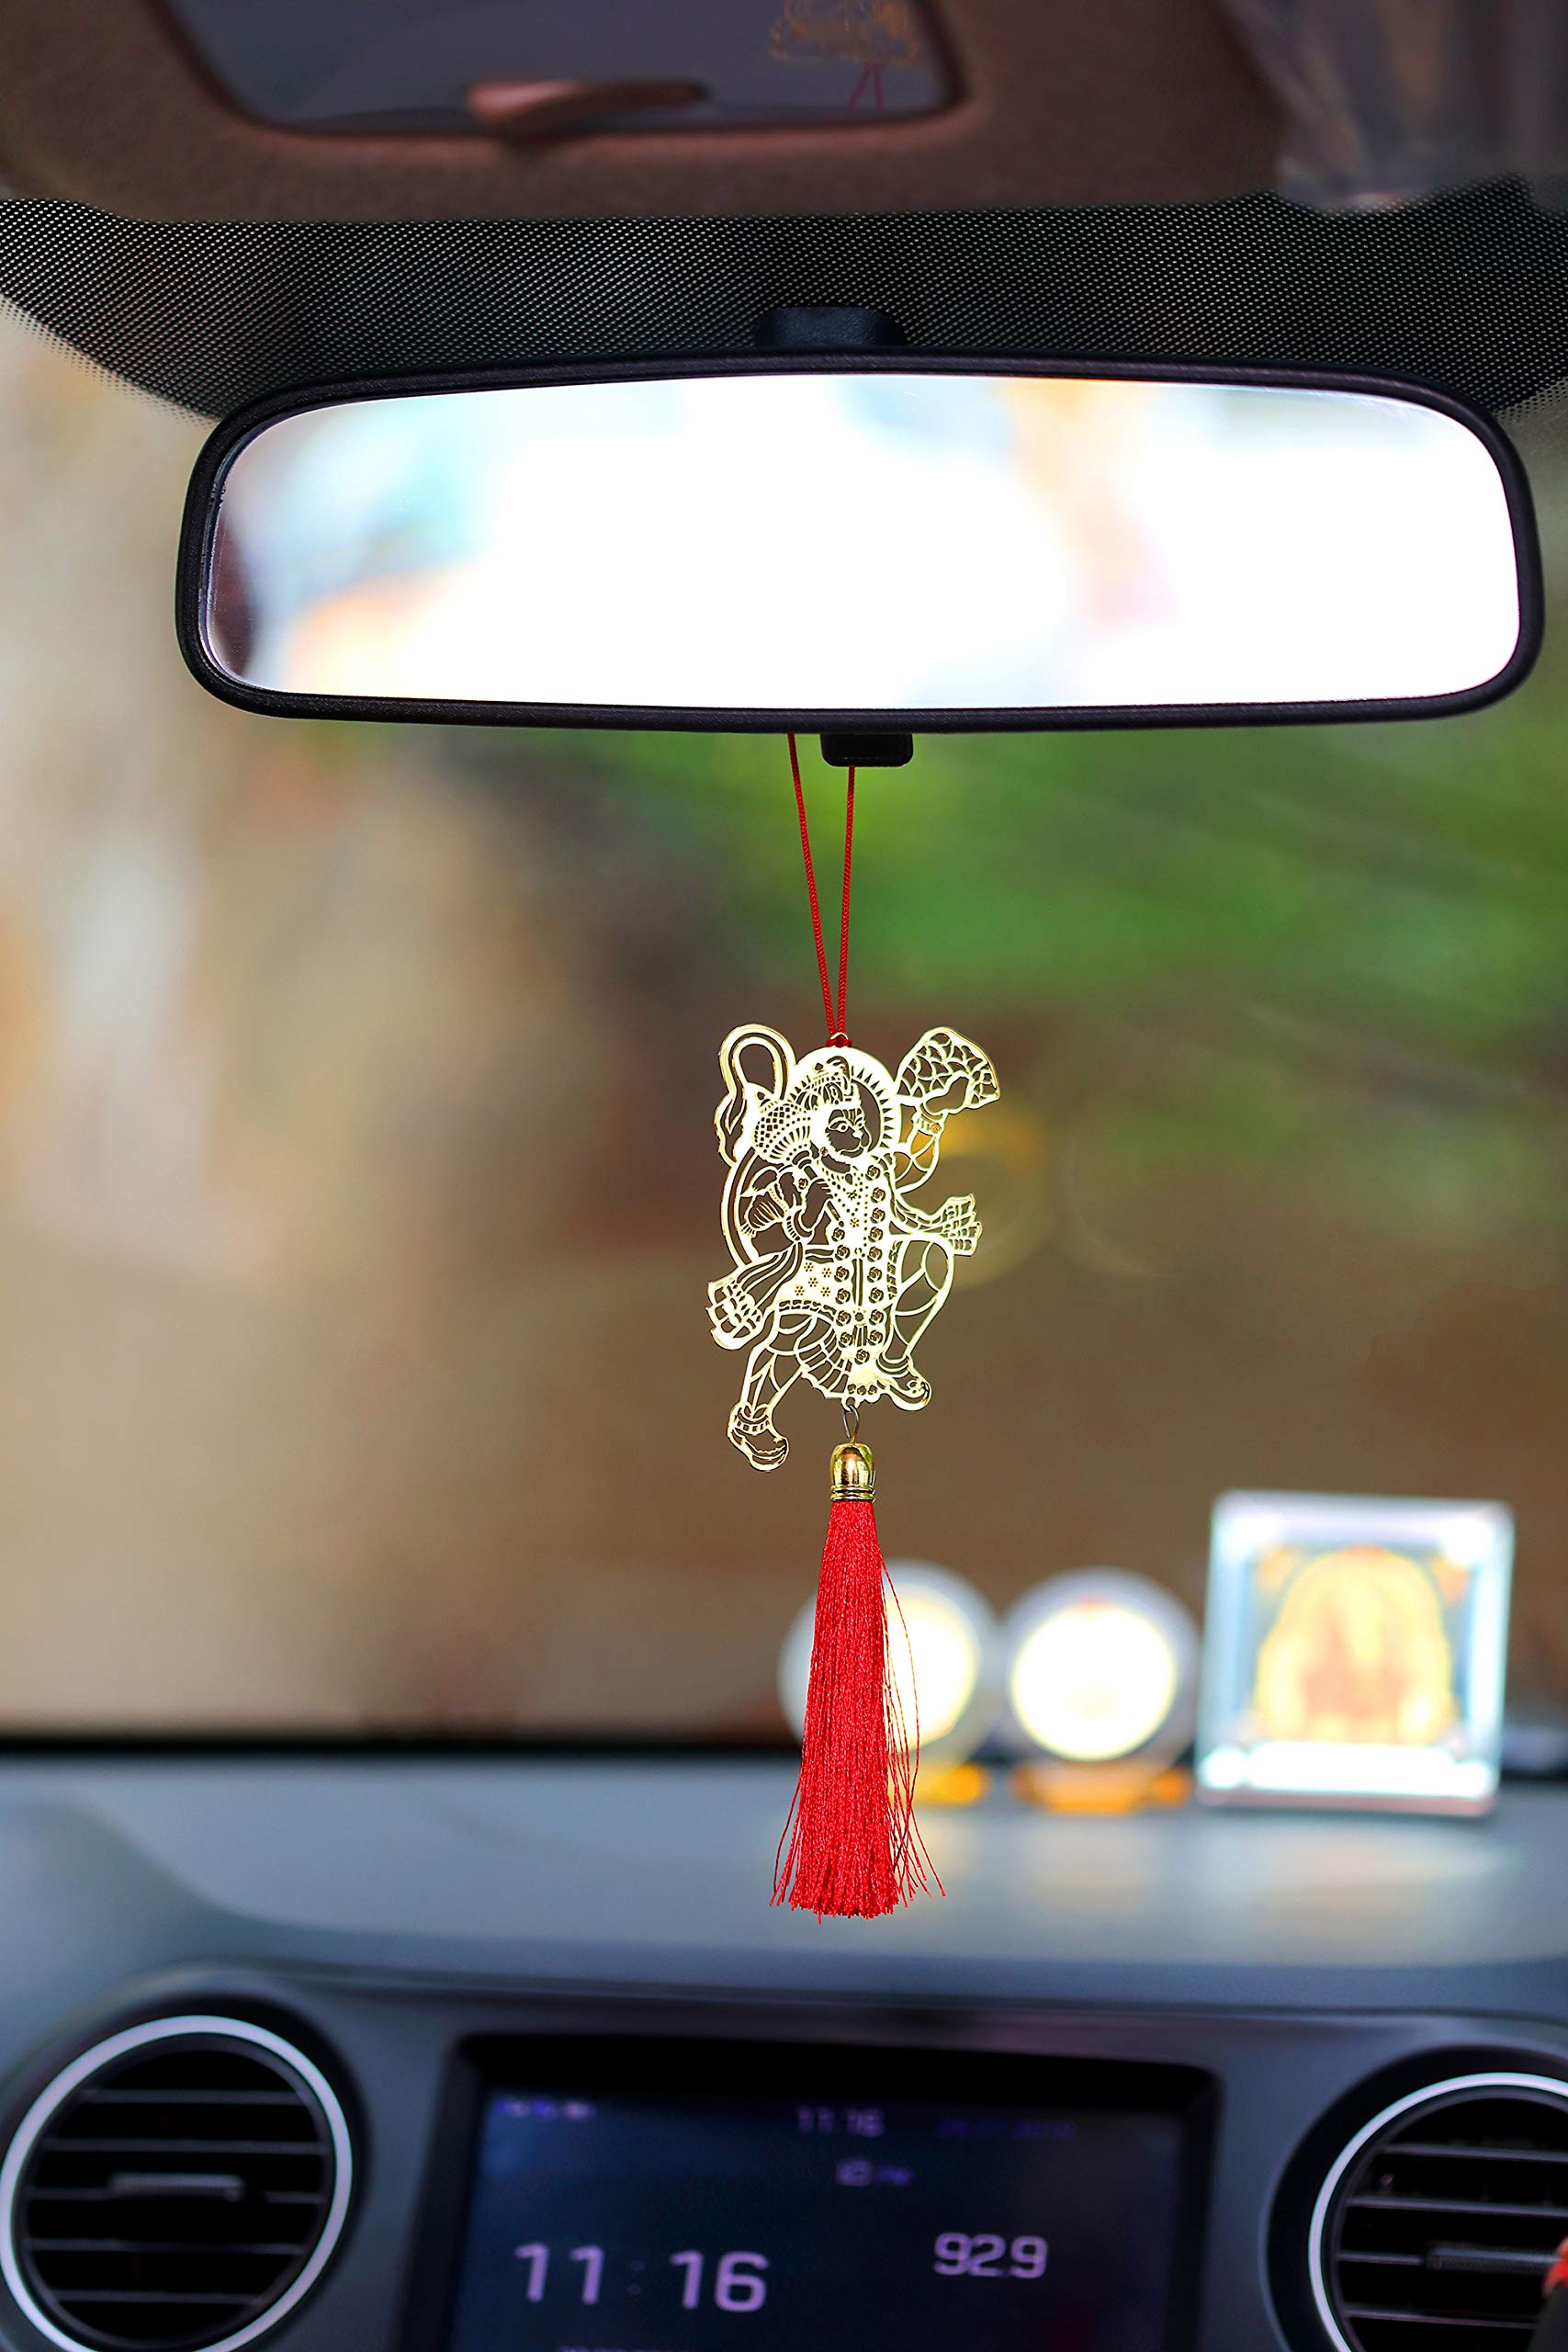 Pack of 2 - Flying Hanuman/ Bajrang Bali Hanging Accessories for Car rear view mirror Décor in Brass